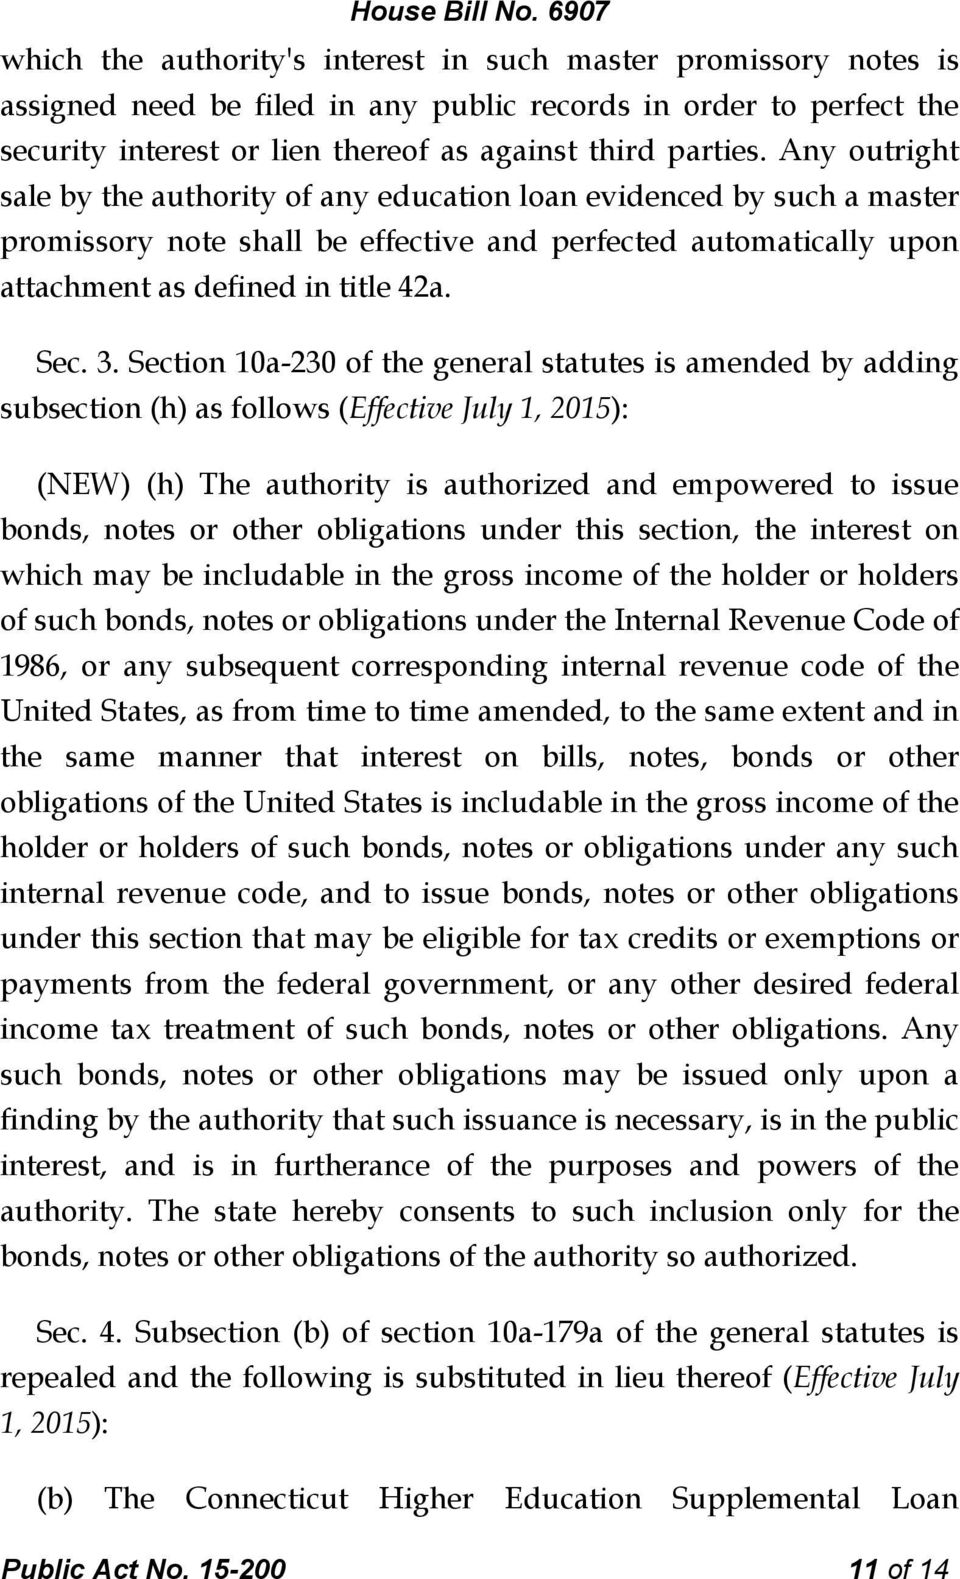 Section 10a-230 of the general statutes is amended by adding subsection (h) as follows (Effective July 1, 2015): (NEW) (h) The authority is authorized and empowered to issue bonds, notes or other